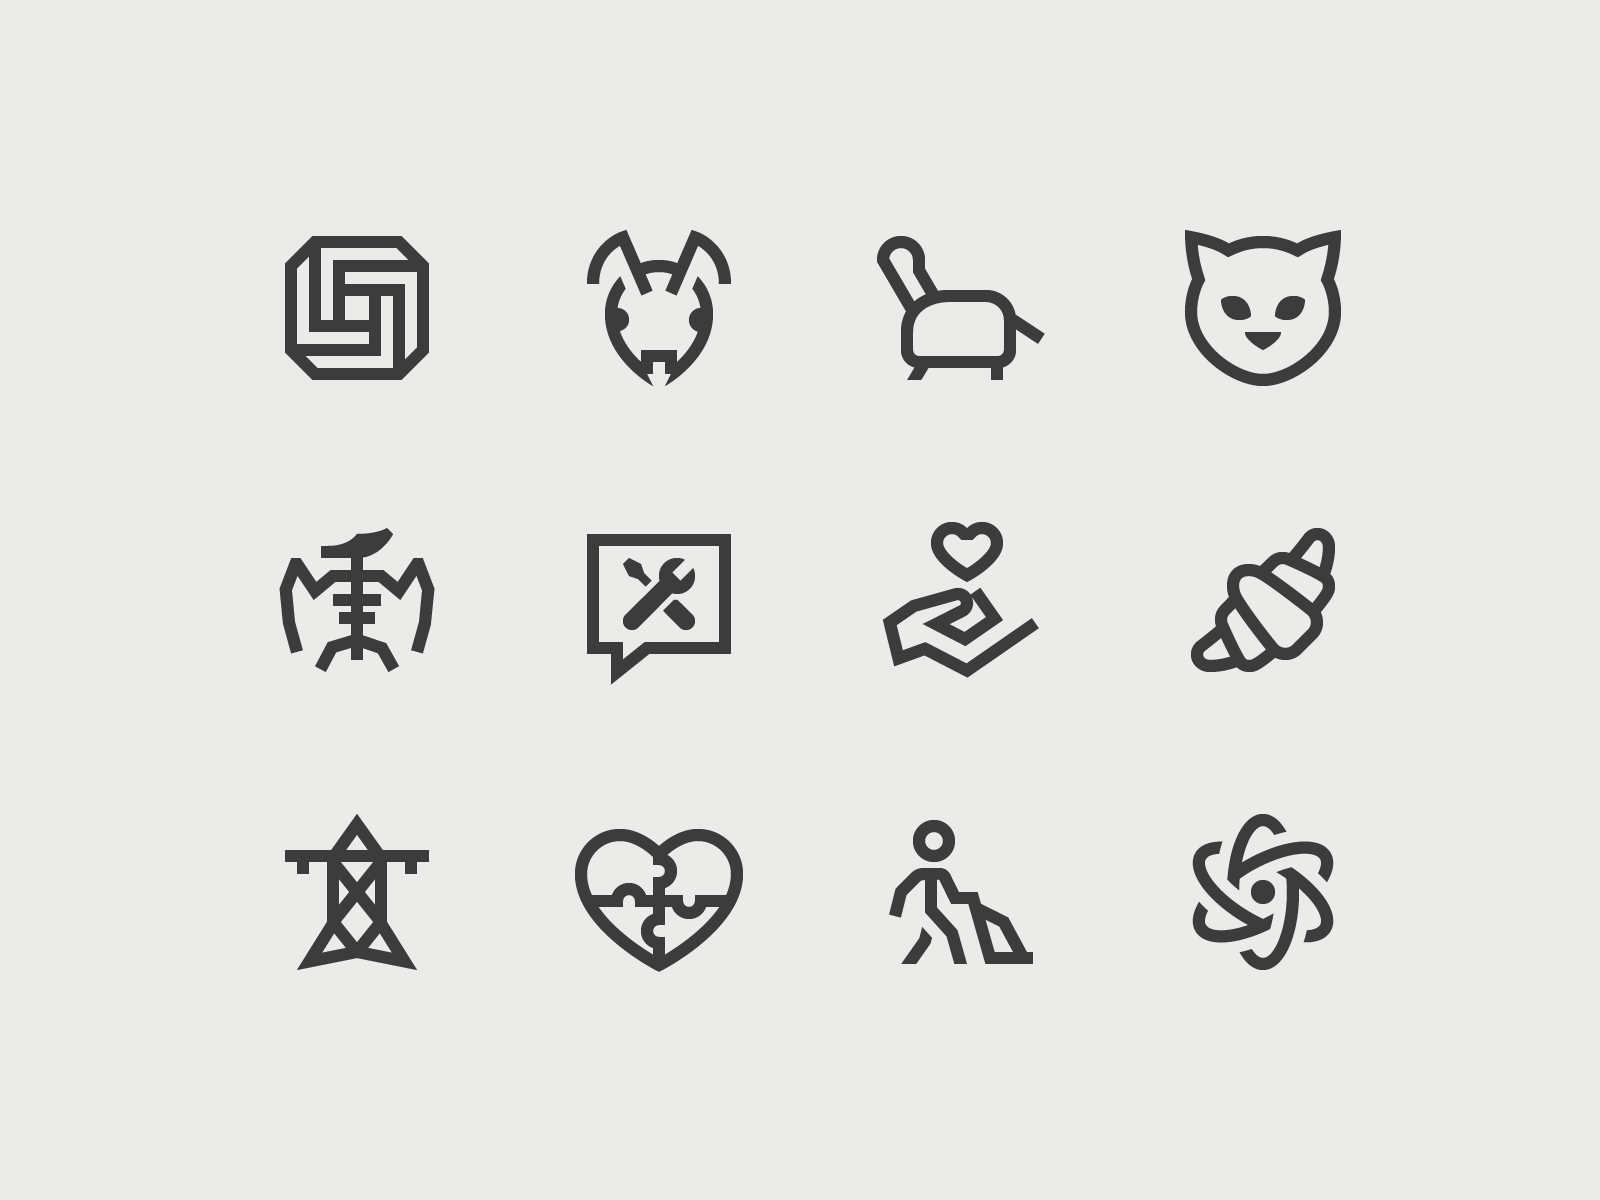 Windows 10 icons by Marina Green for Icons8 on Dribbble